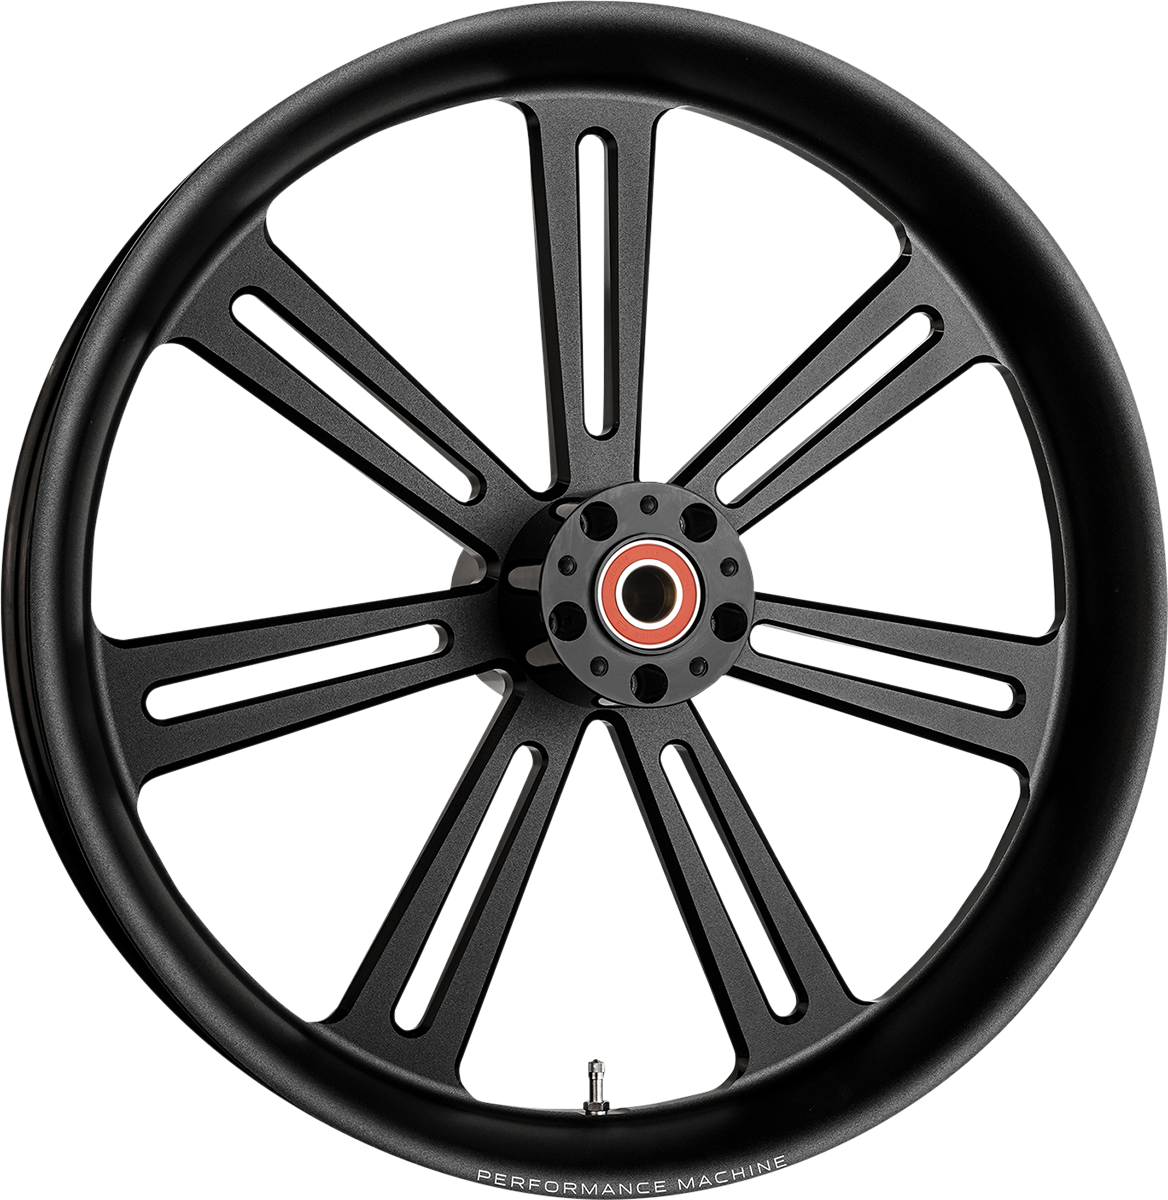 Performance Machine 21" Non ABS Front Motorcycle Wheel 2008-2021 Harley Touring